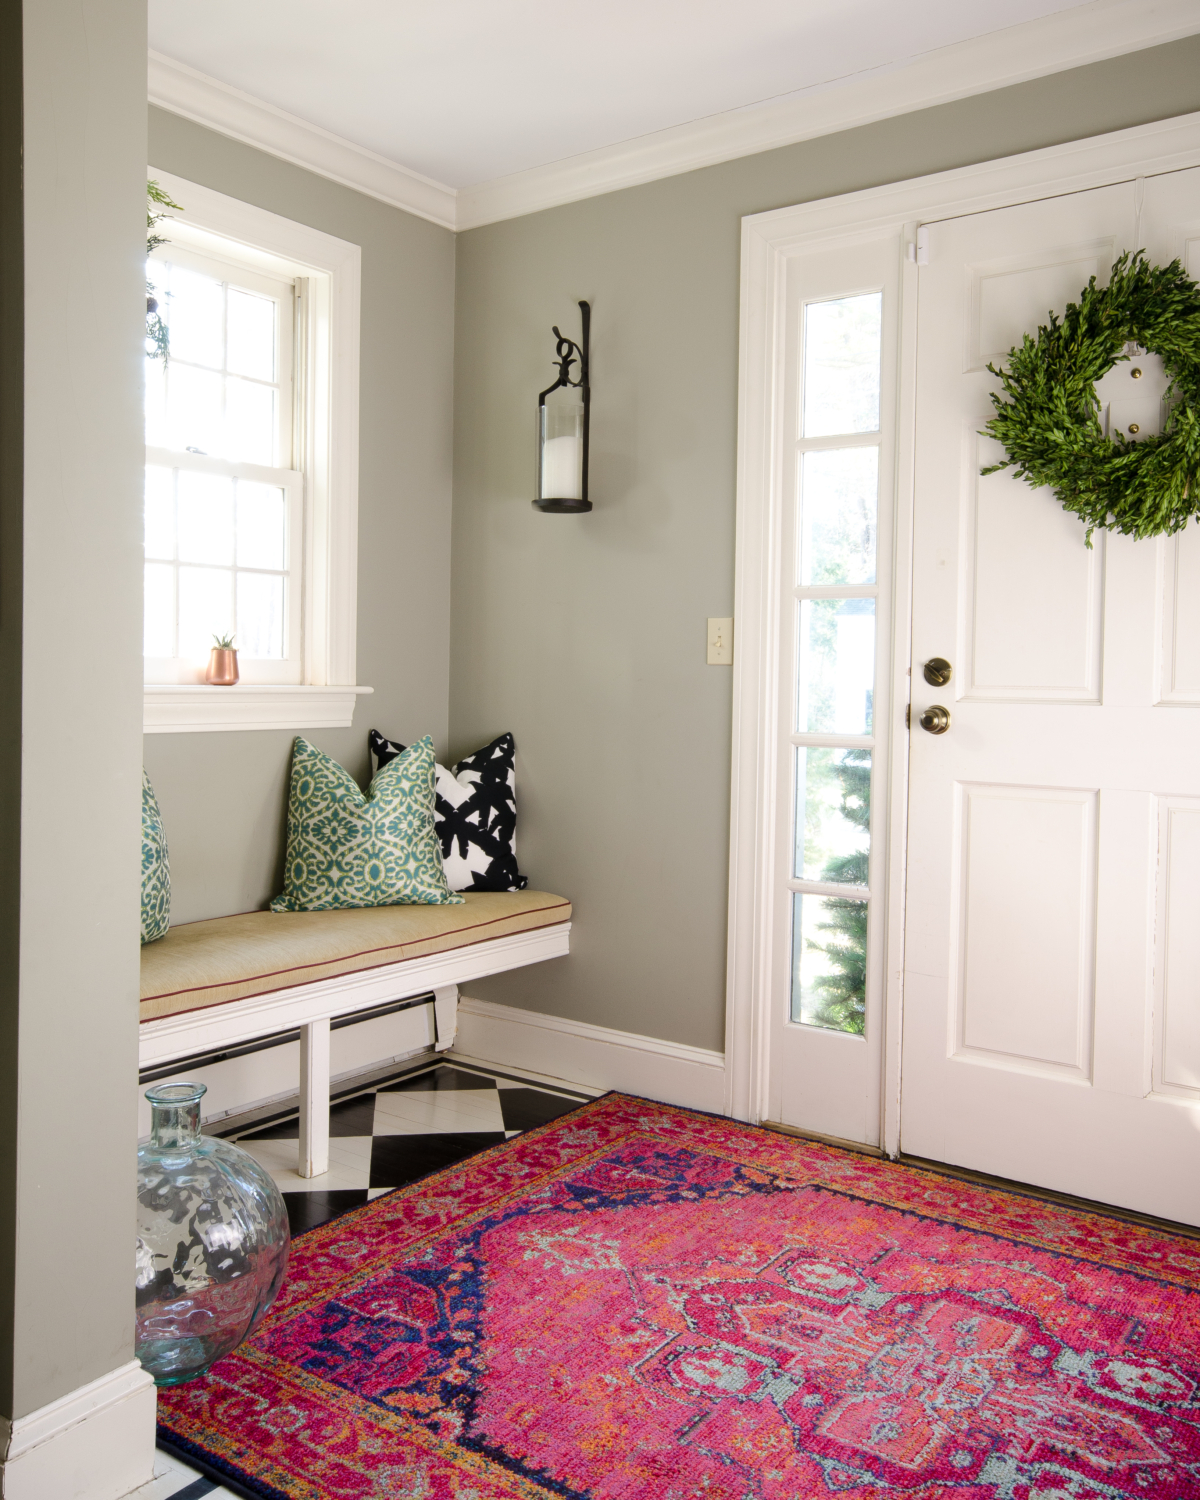 A charming, fresh entryway design featuring black and white, deep pink, and teal blue accents.